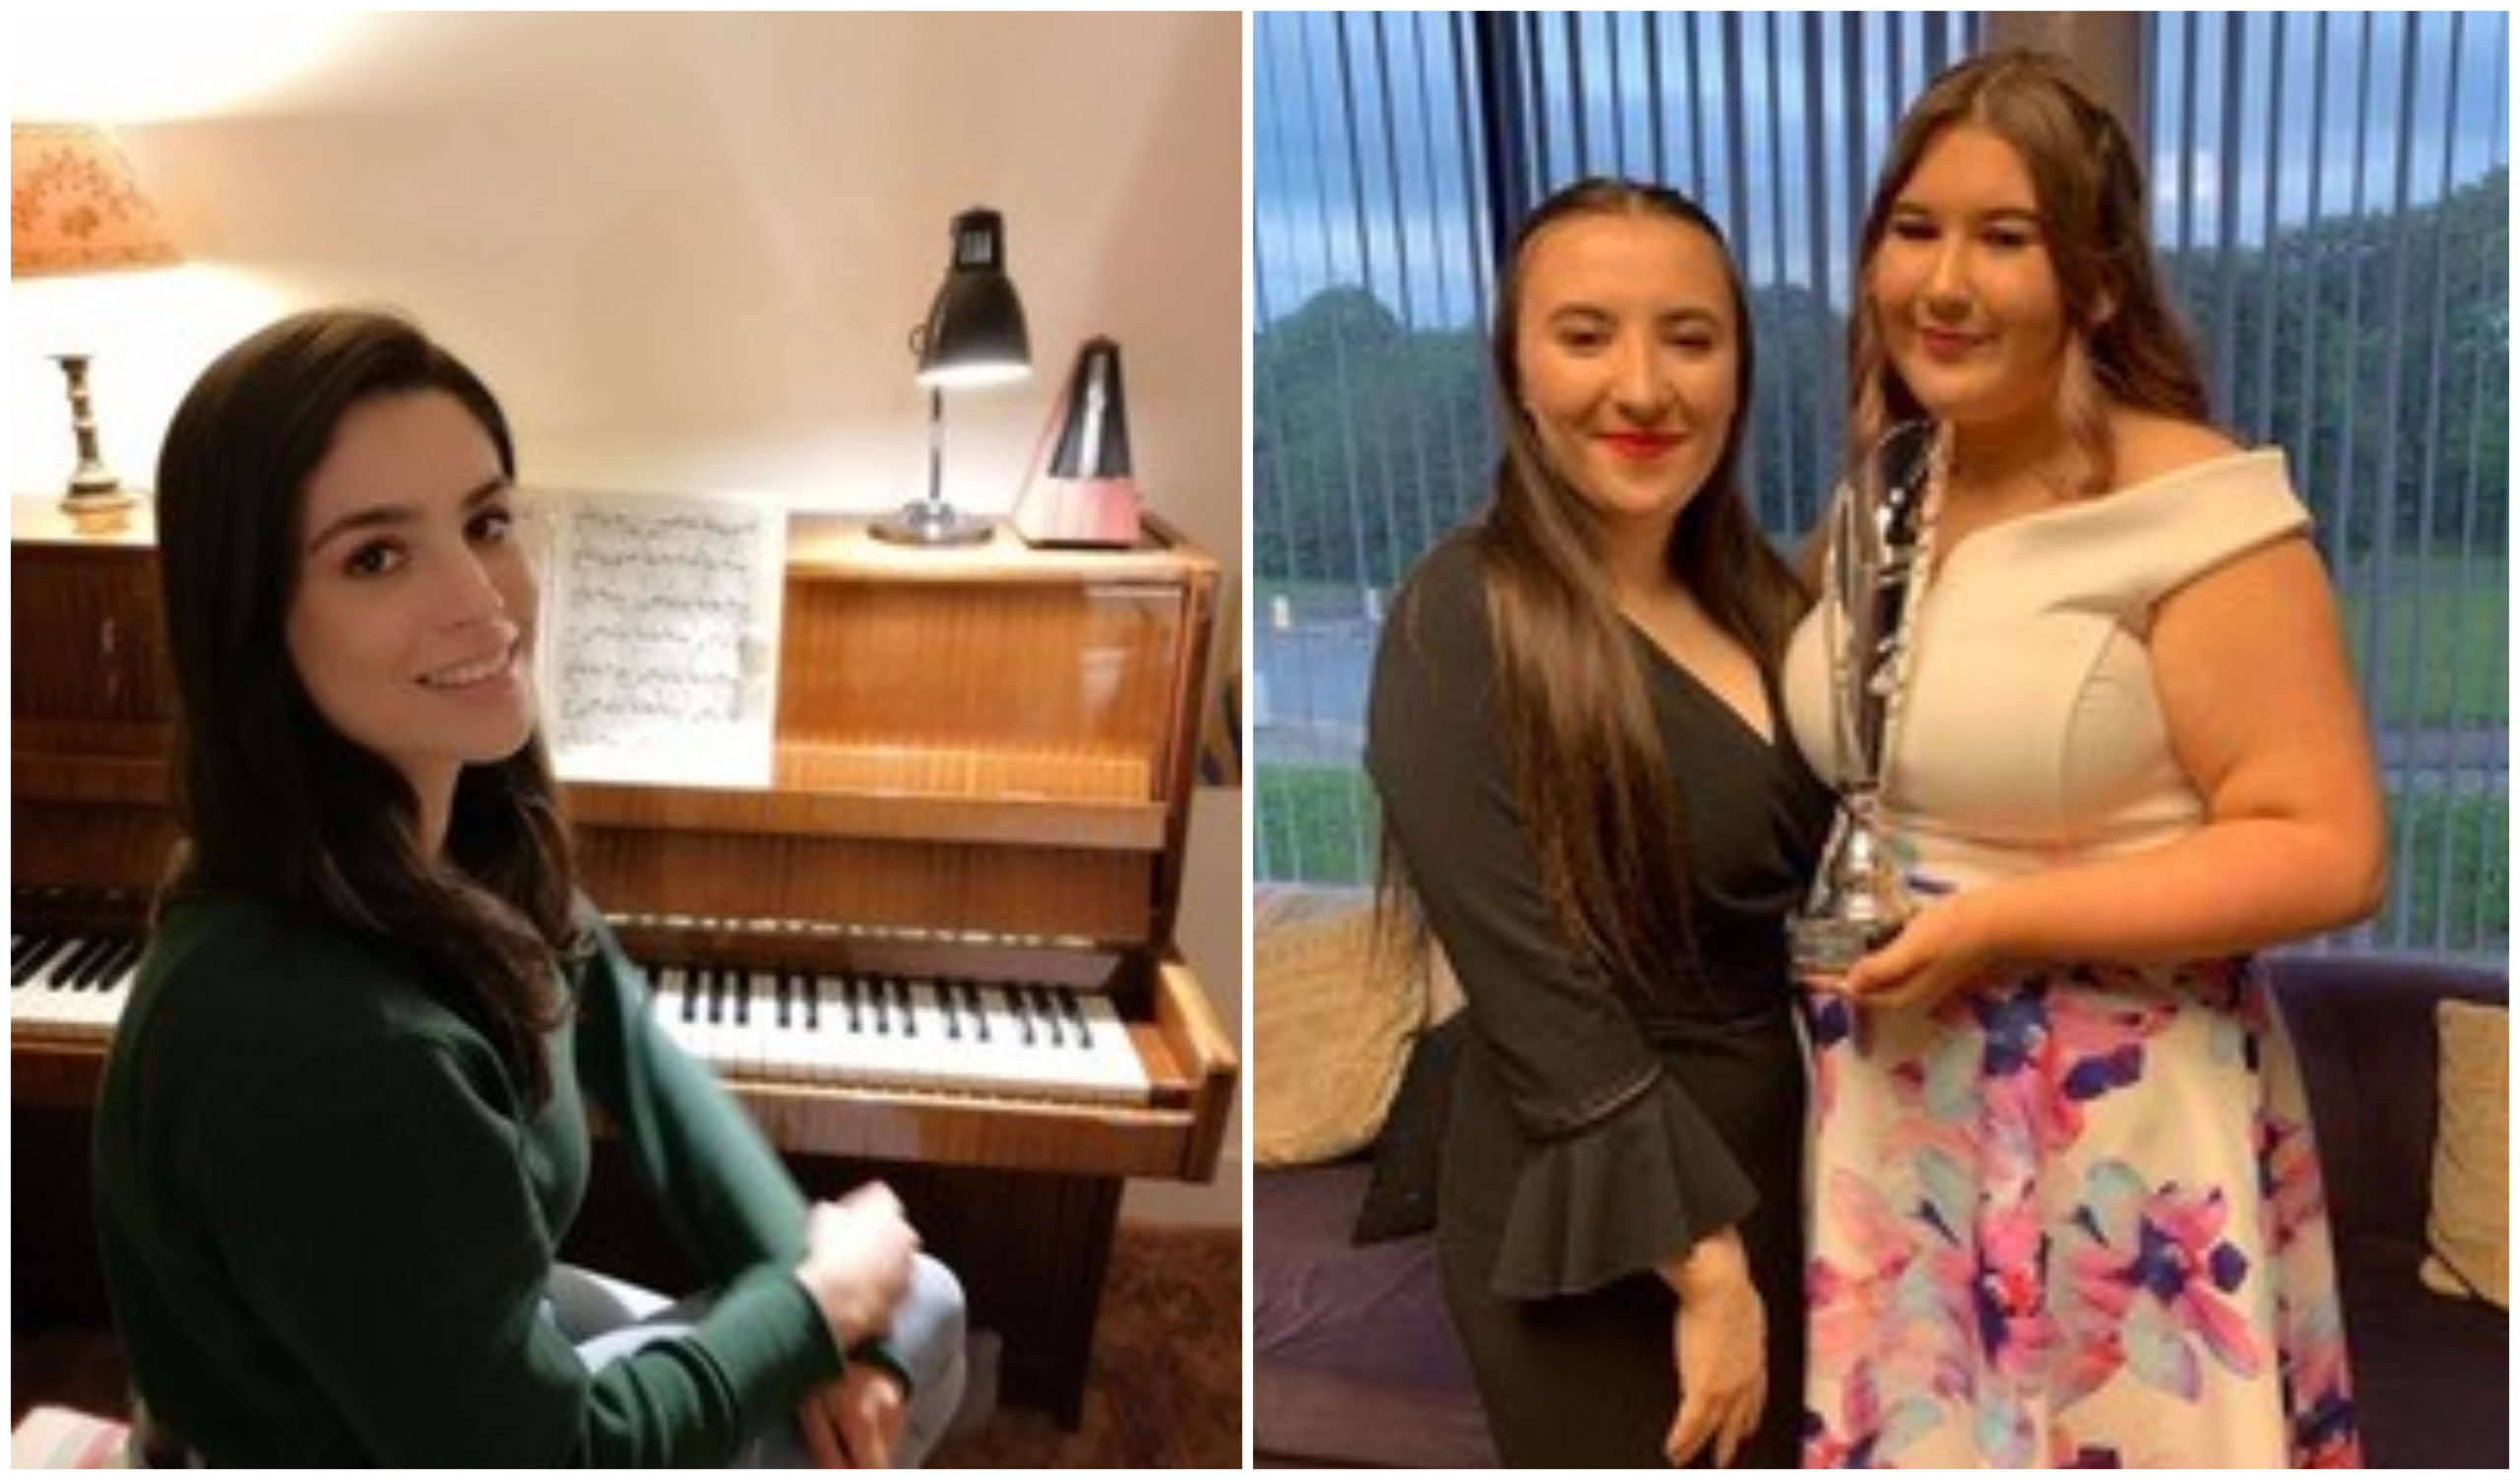 Martha Forbes, Carys Taylor and Rebecca West were awarded bursaries at the festival.